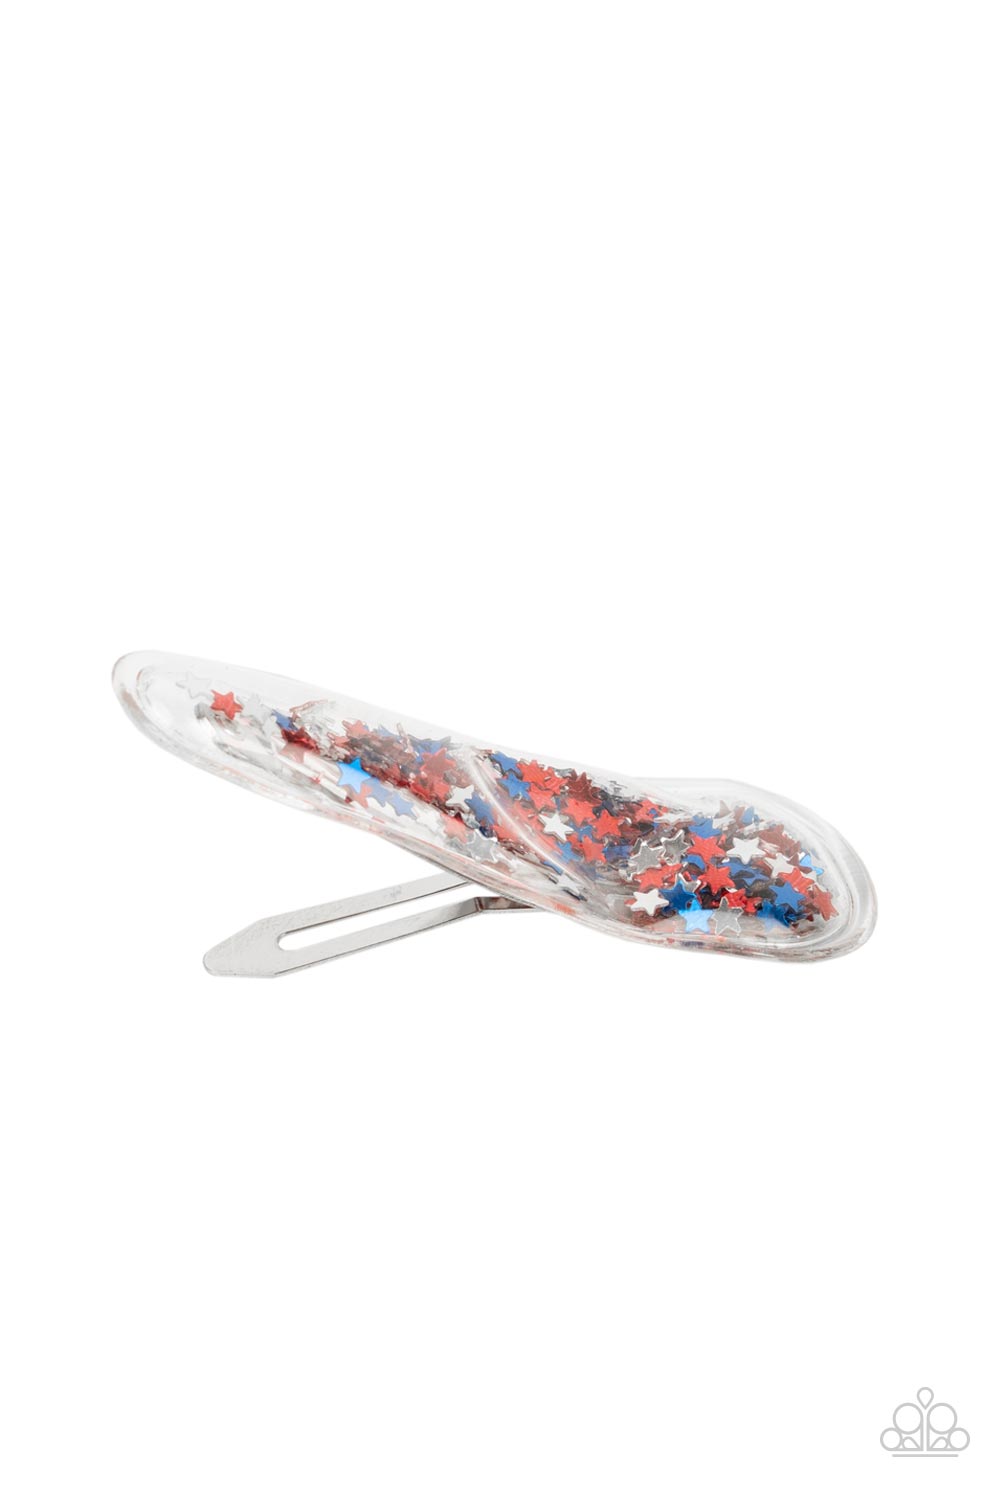 Oh, My Stars and Stripes - Multi Paparazzi Hair Accessory